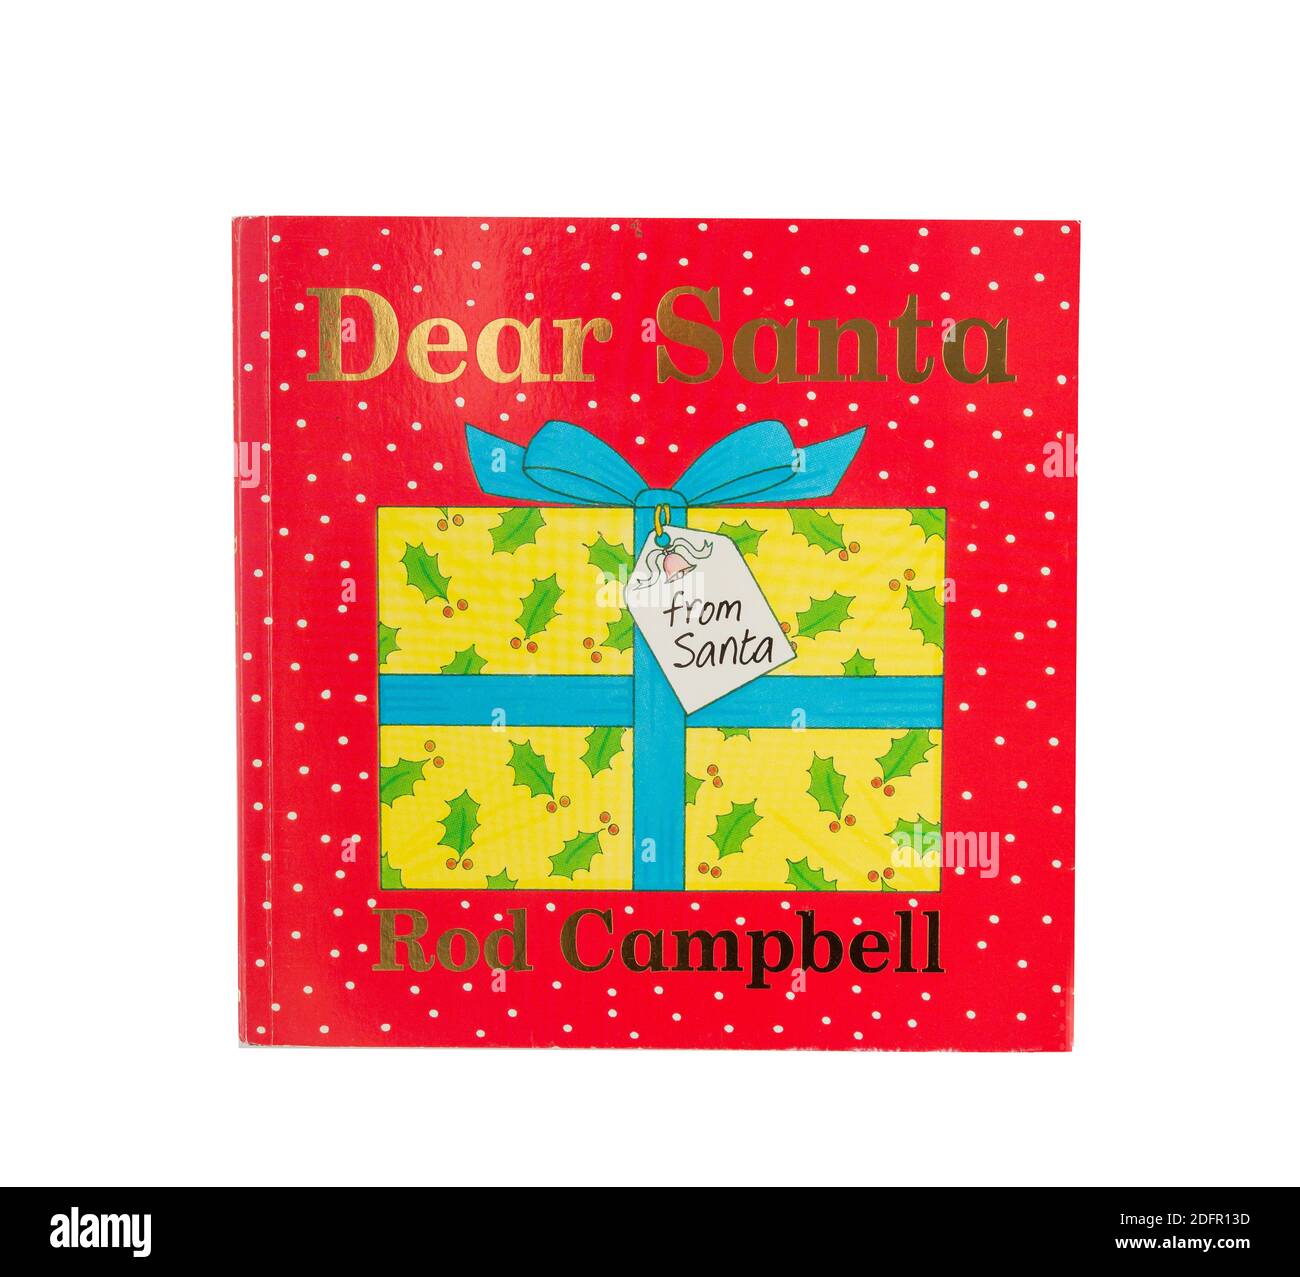 Dear Santa picture book by Rod Campbell, Greater London, England, United Kingdom Stock Photo